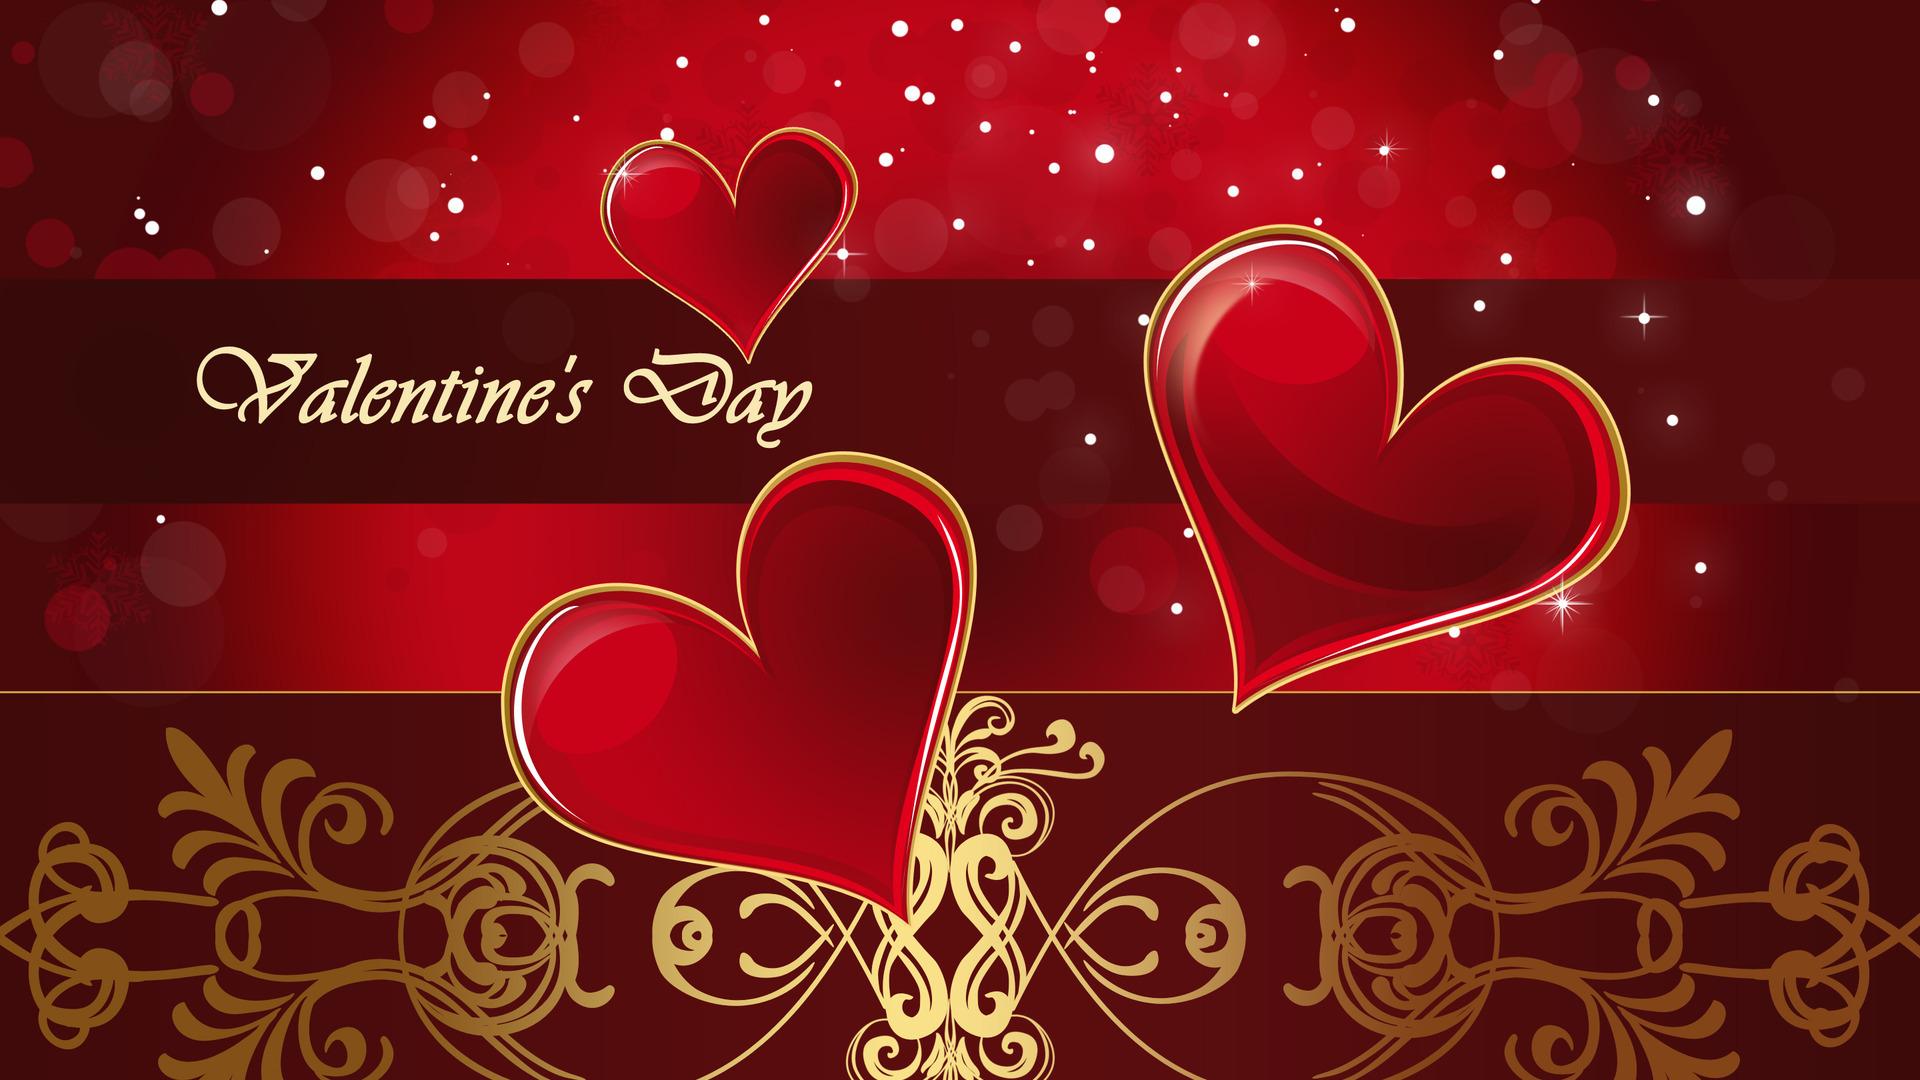 Happy Valentines Day Images Pics Photos Wallpapers